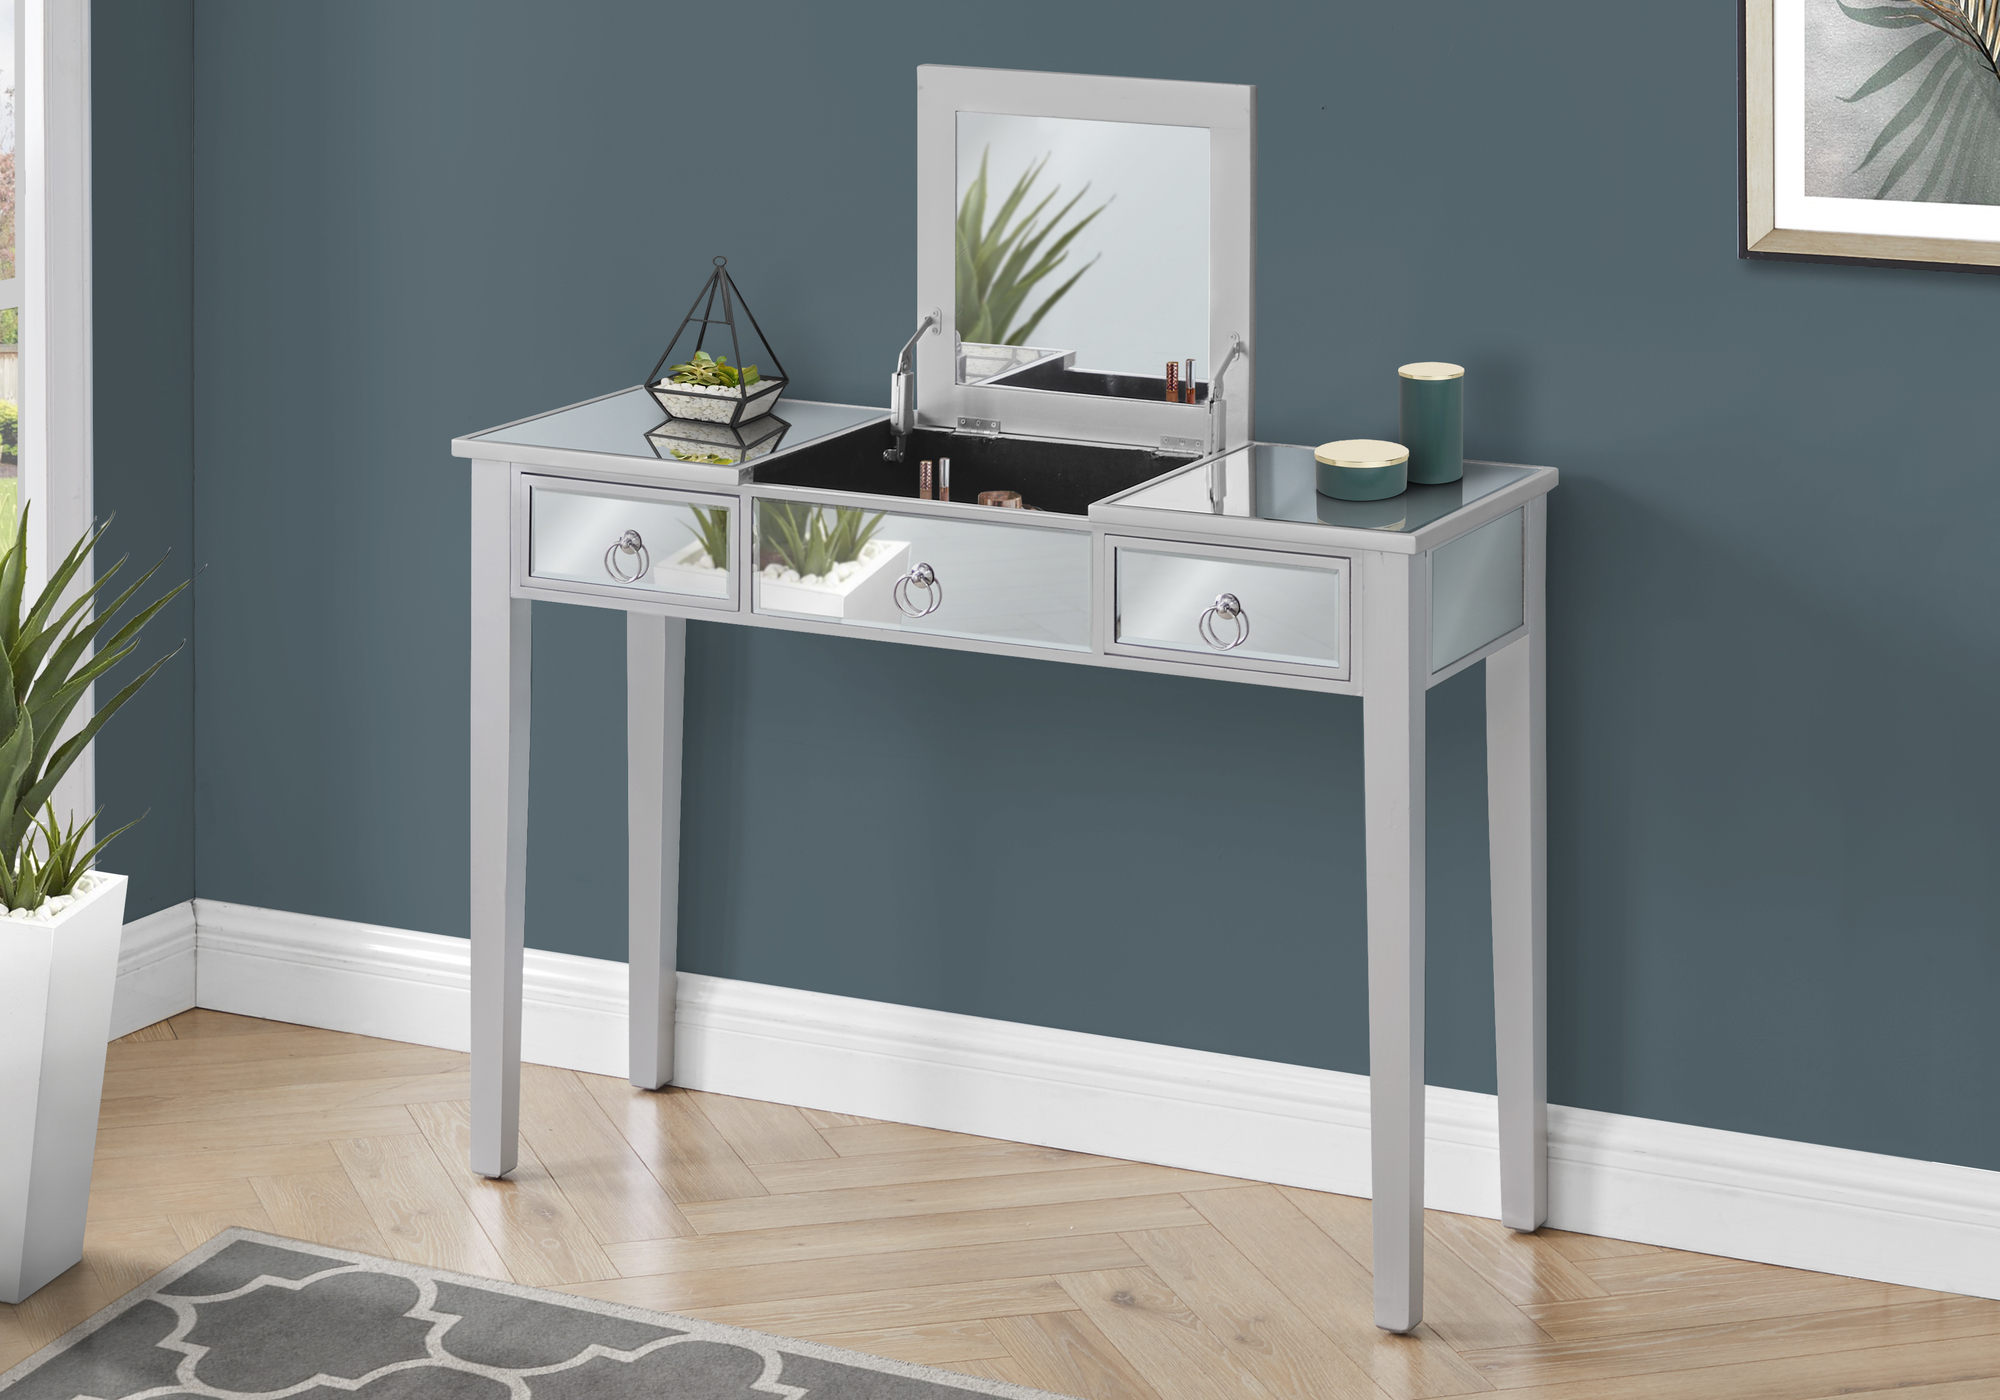 What Are The Advantages Of A Bedroom Vanity Set?